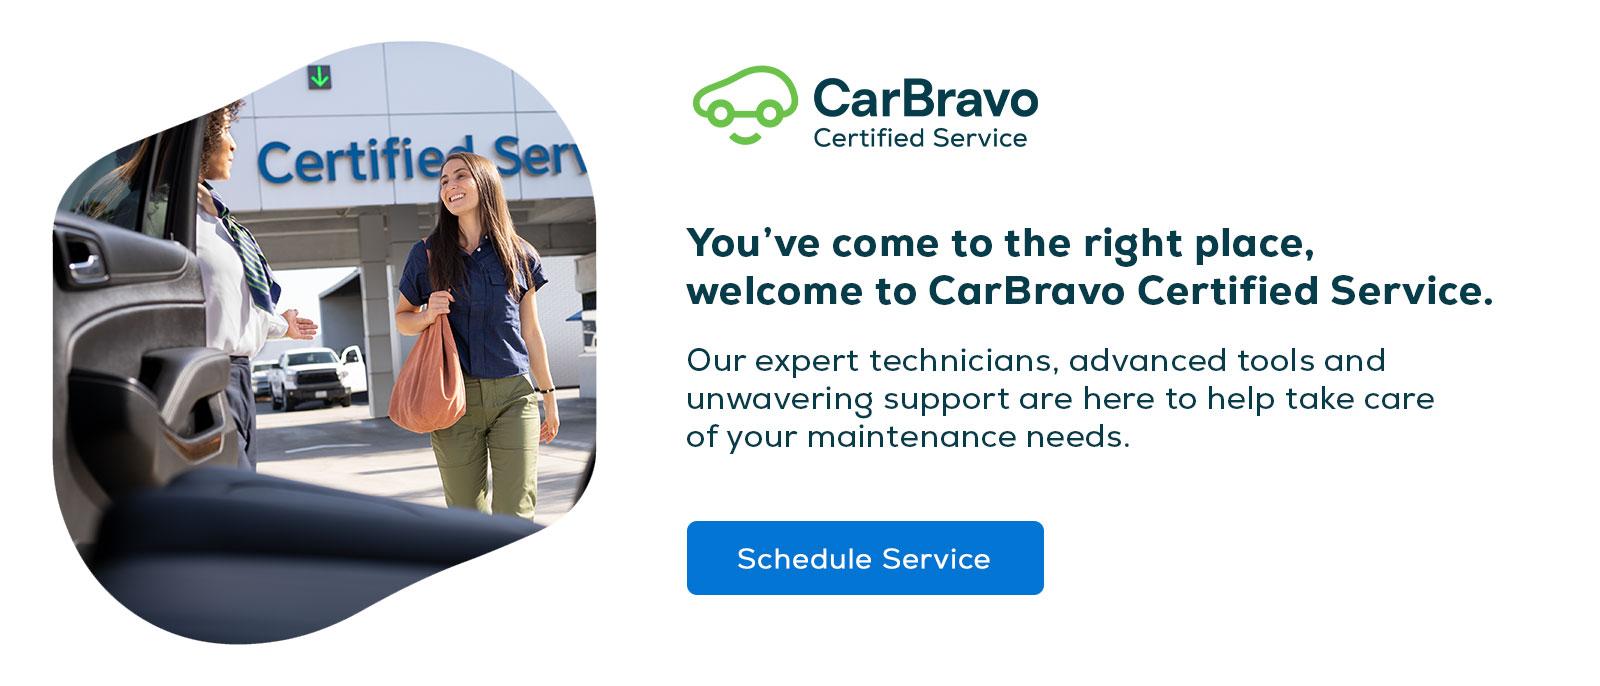 Our technicians are here to help take care of your maintenance needs.